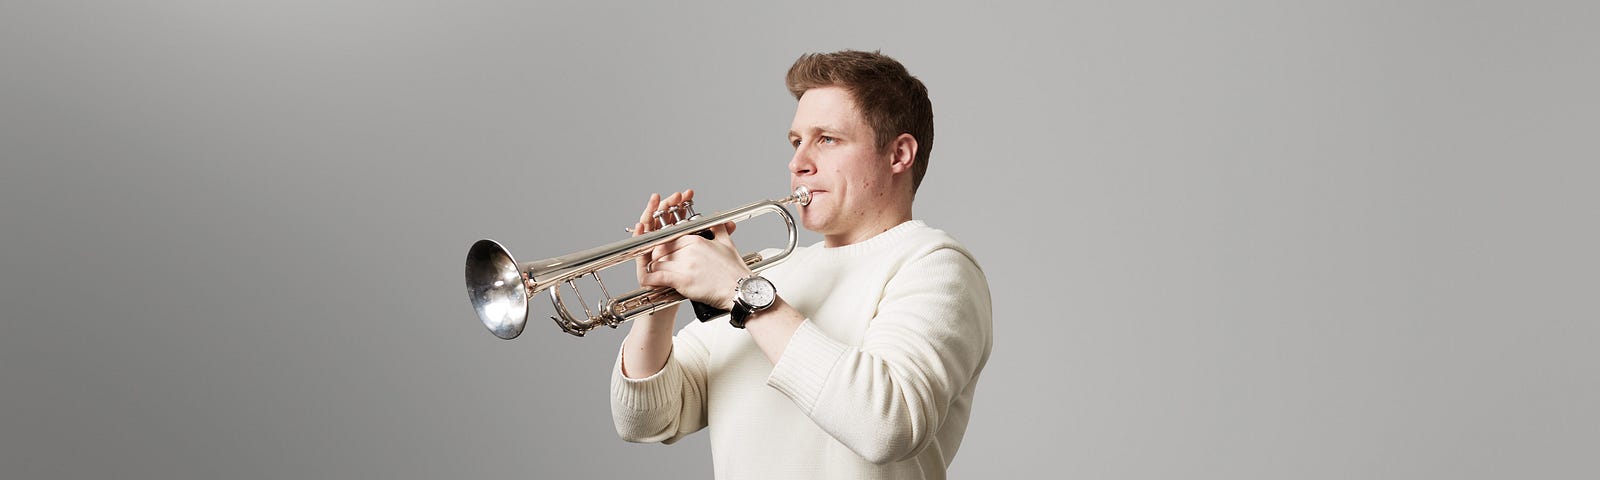 Philip Cobb playing trumpet wearing a white jumper, in front of a plain grey background